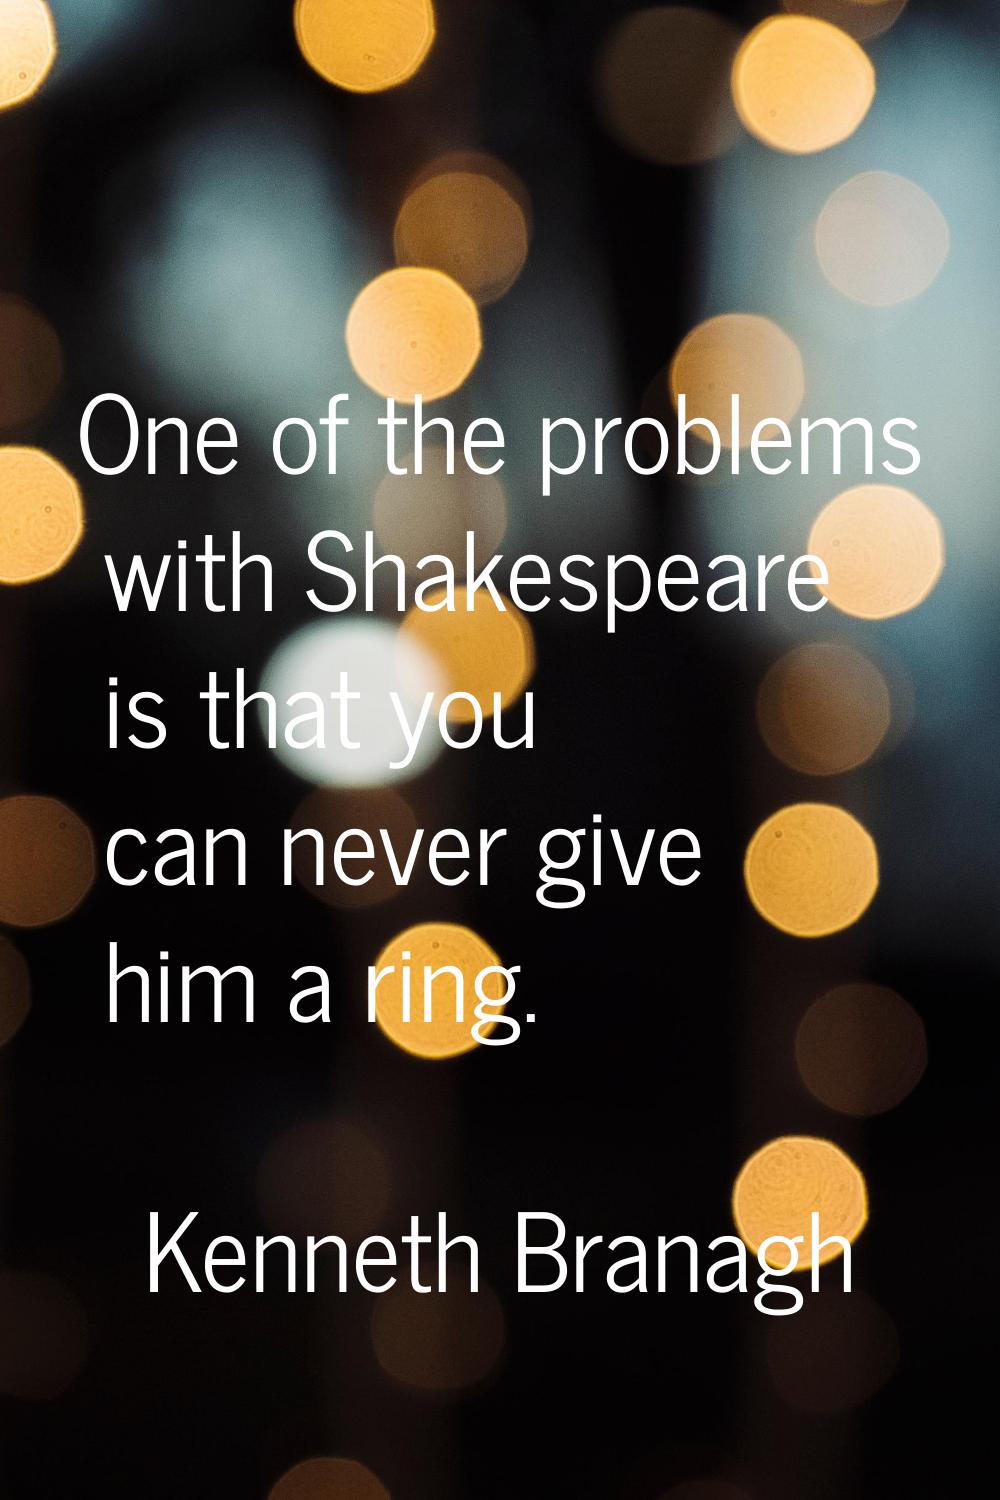 One of the problems with Shakespeare is that you can never give him a ring.